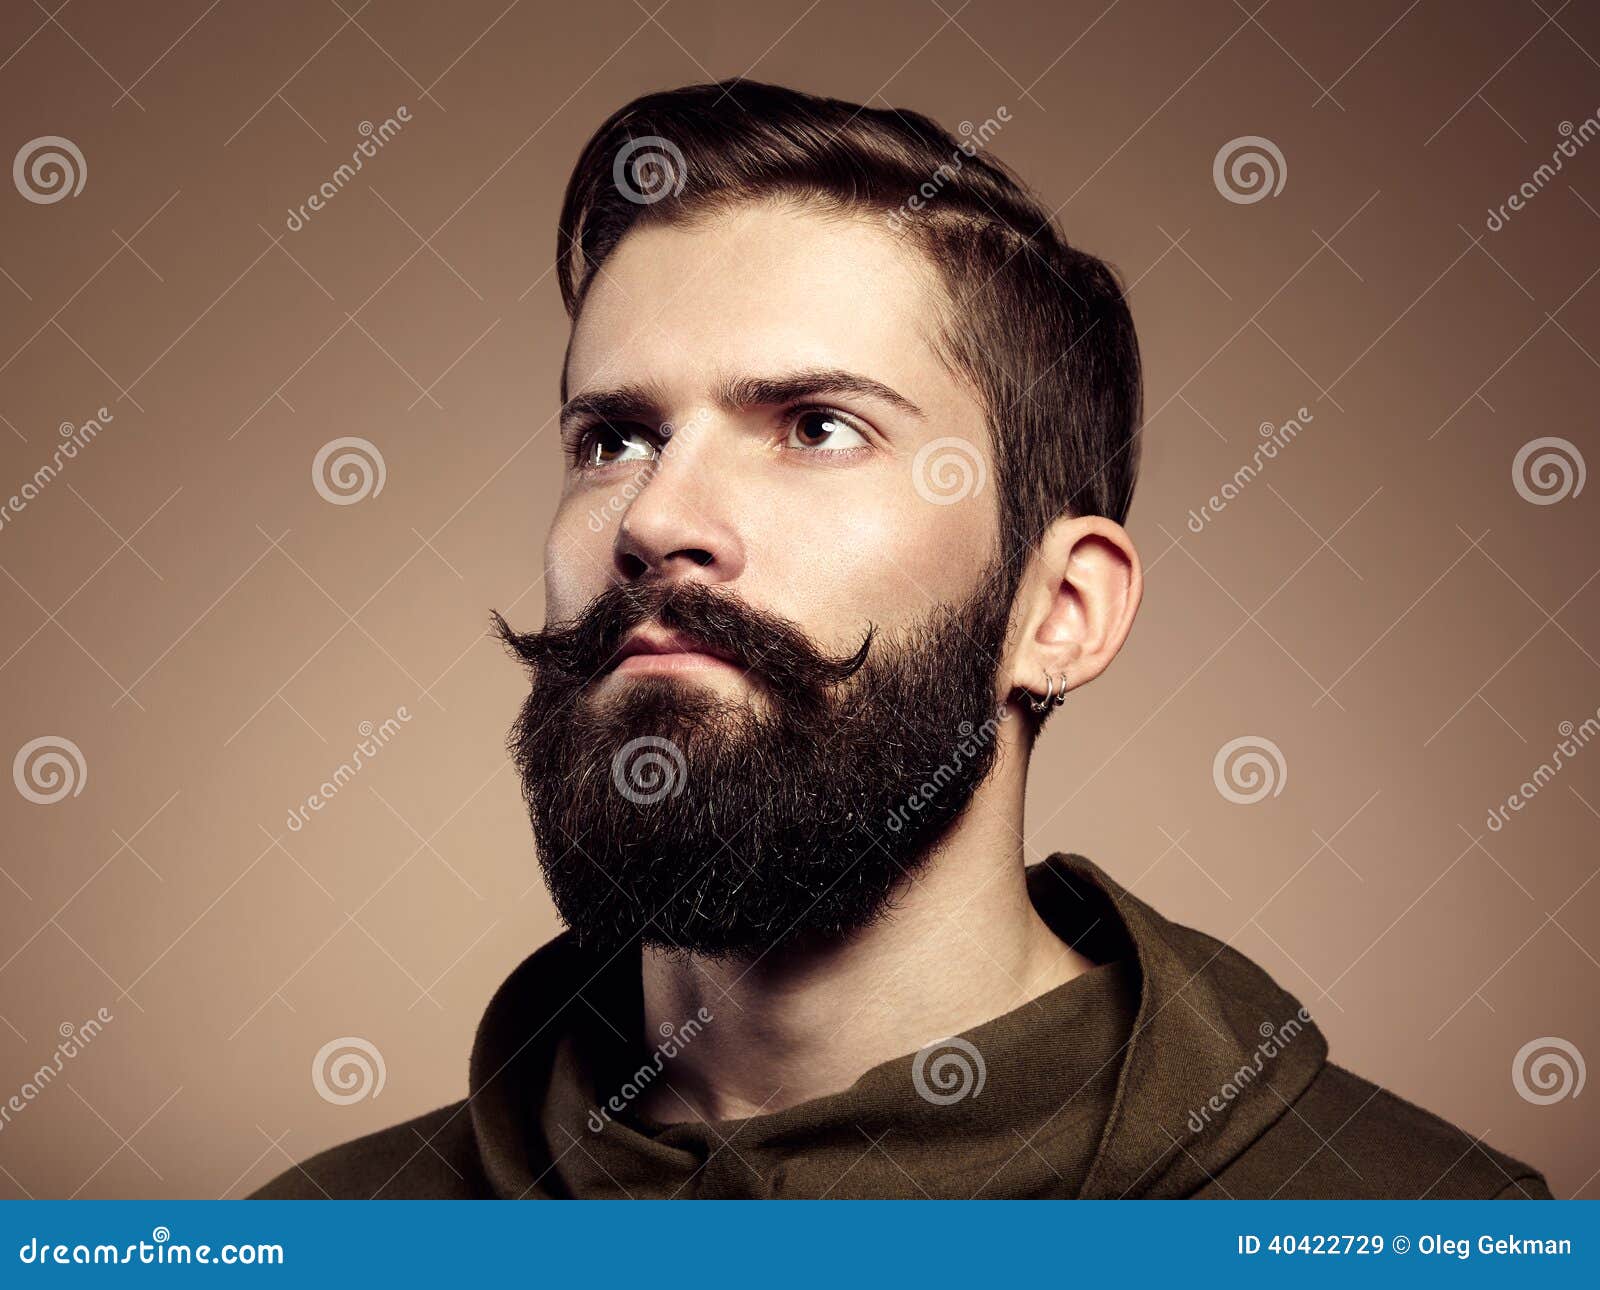 Portrait Of Handsome Man With Beard Stock Image Image Of Caucasian